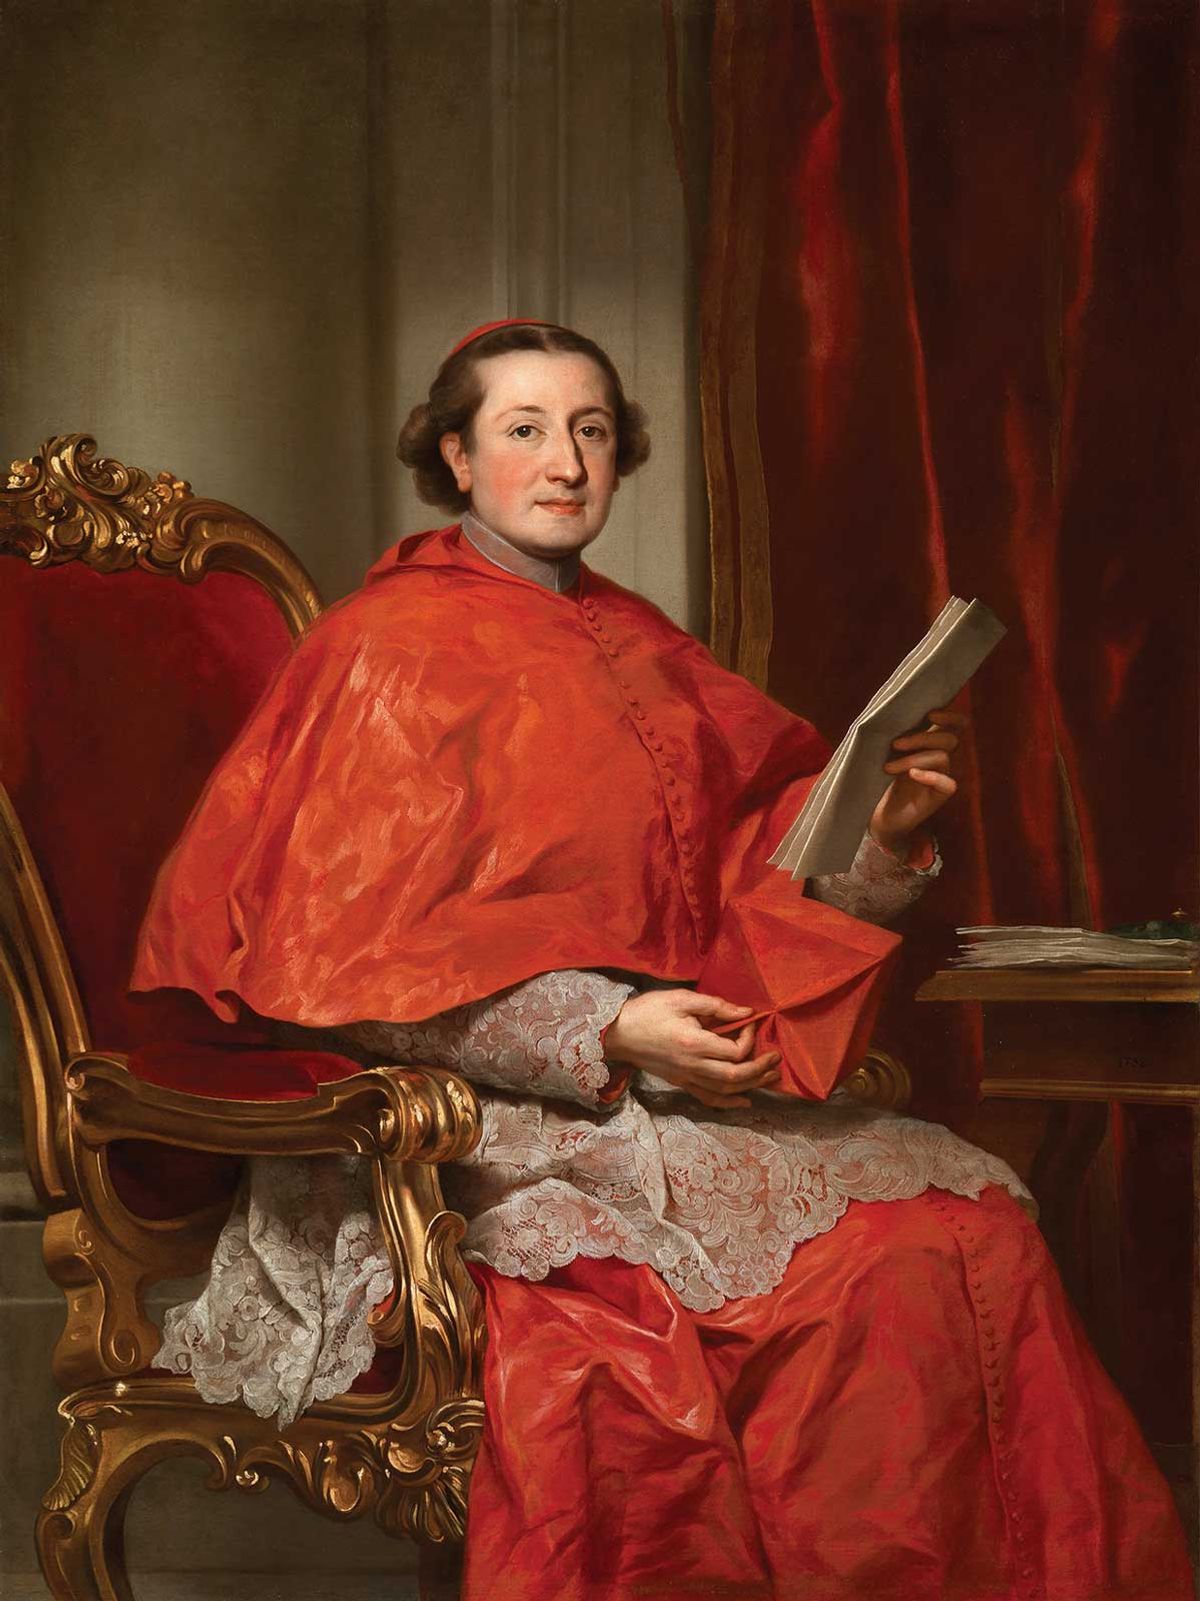 A modern seduction: “the symphony of reds” in Anton Raphael Mengs’s Portrait of Cardinal Carlo Rezzonico (1758-59) led to a private acquisition in the region of $750,000

Courtesy Nicholas Hall



